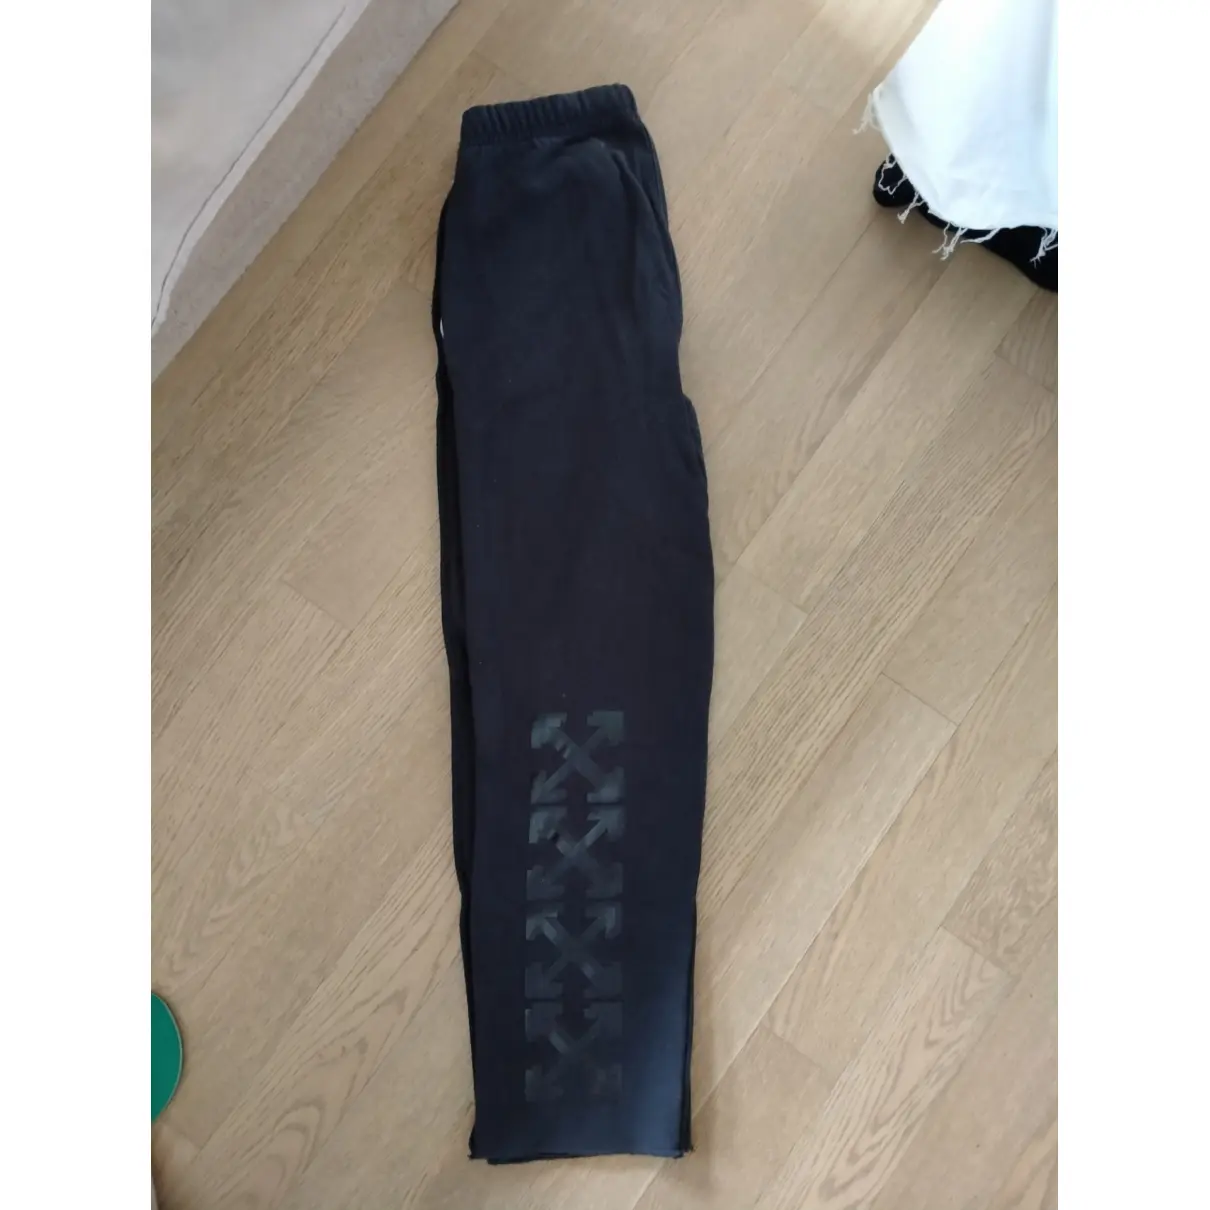 Buy Off-White Trousers online